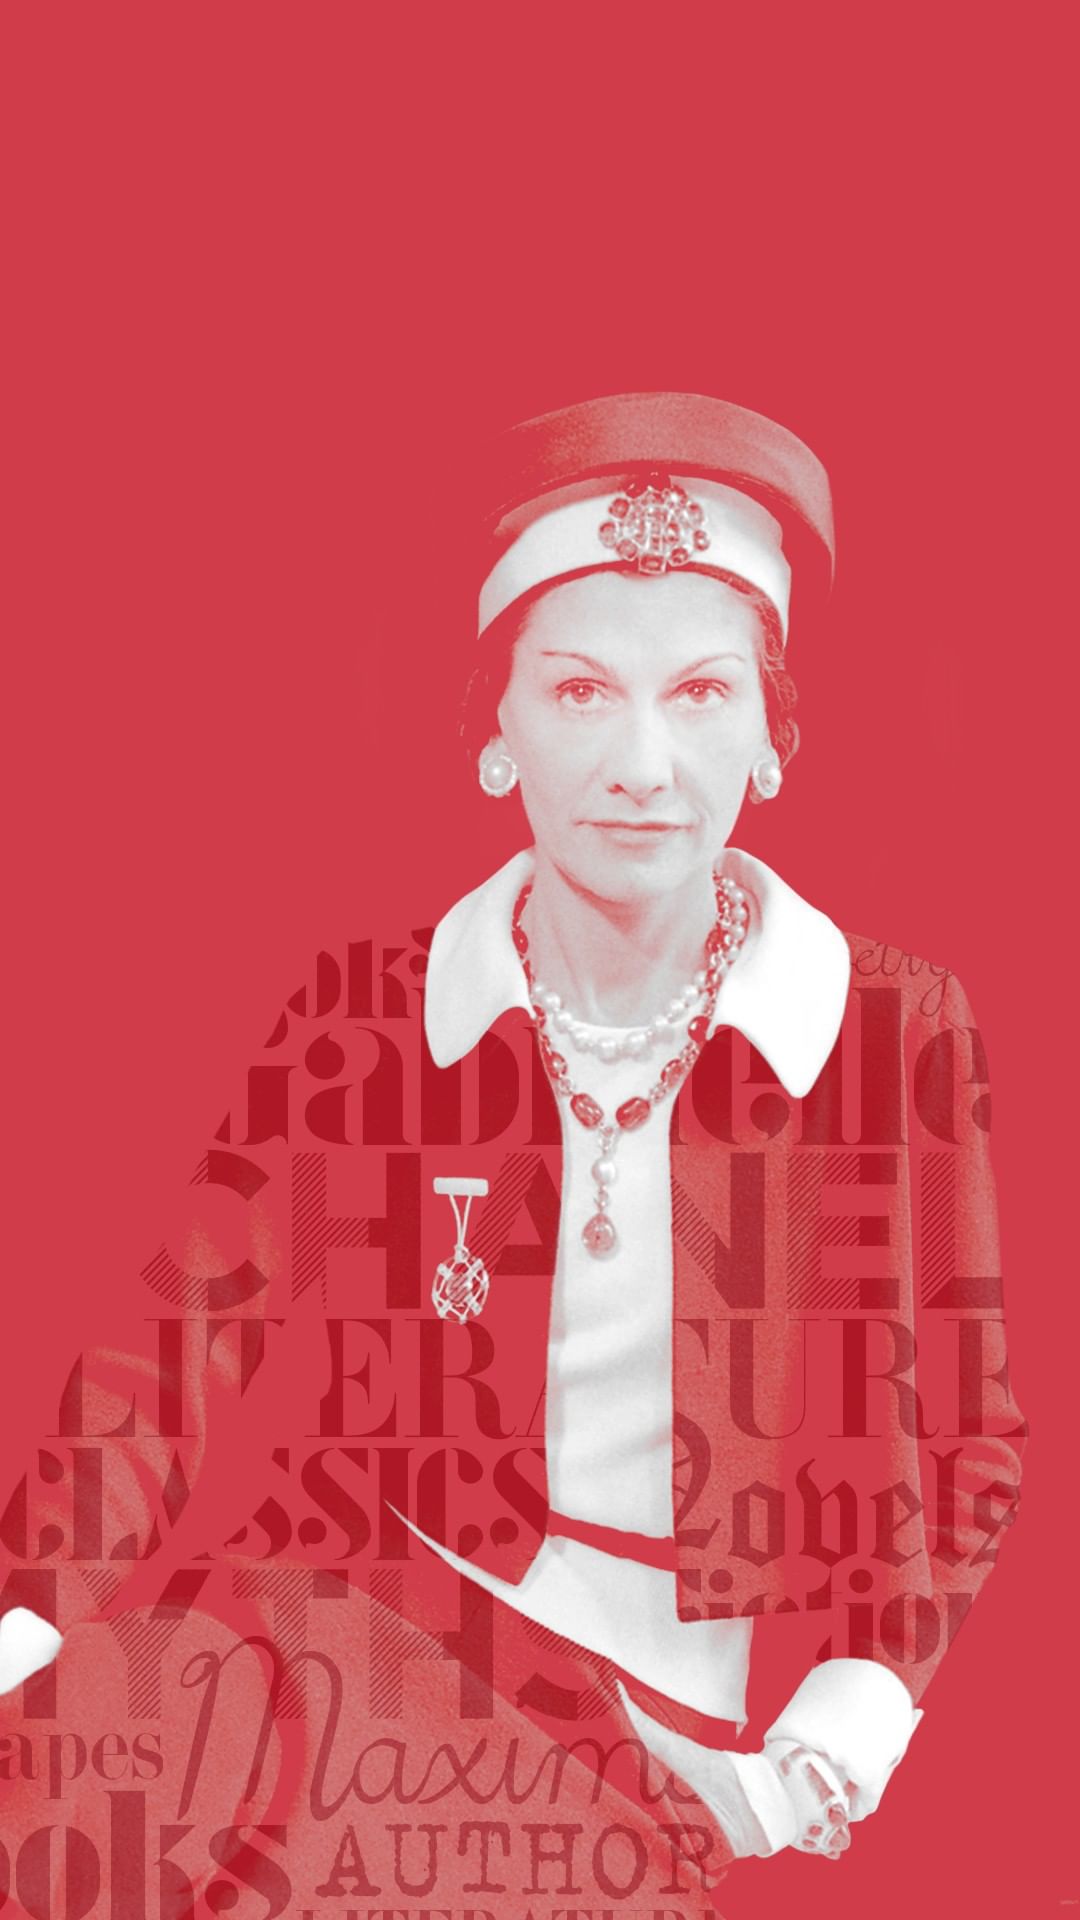 CHANEL - Gabrielle Chanel was passionate about literature and employed it, as a creator, as an avid reader, as a patron, to enrich her worldview and cement her legacy.
Watch the story in this latest e...